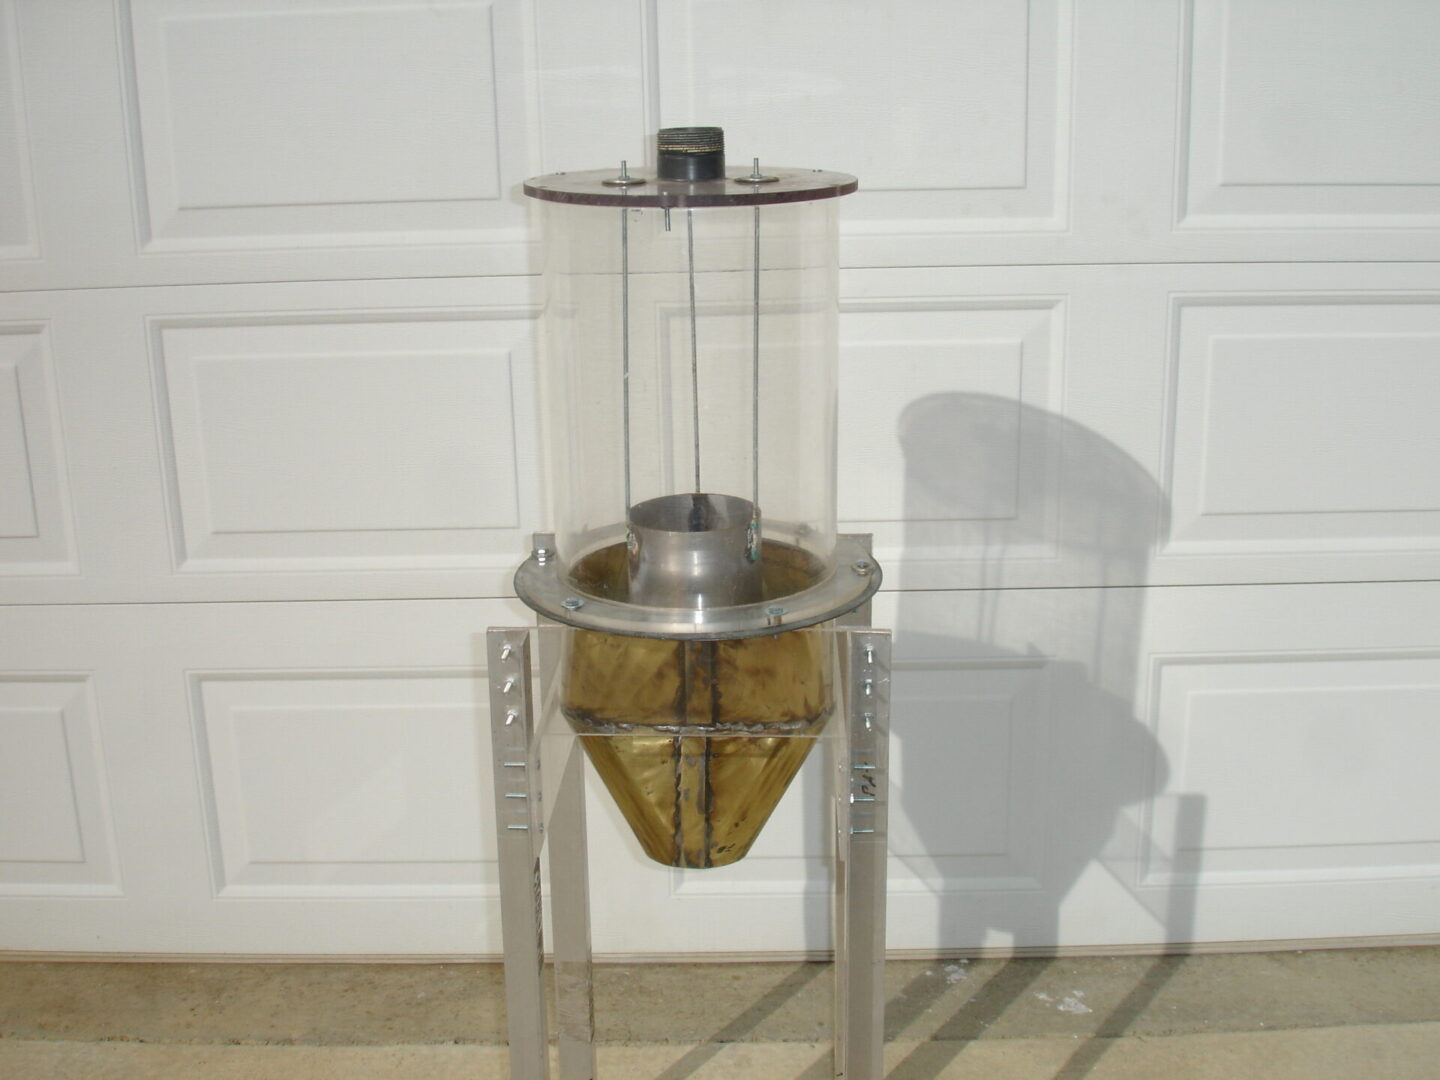 A large glass container on top of a metal stand.